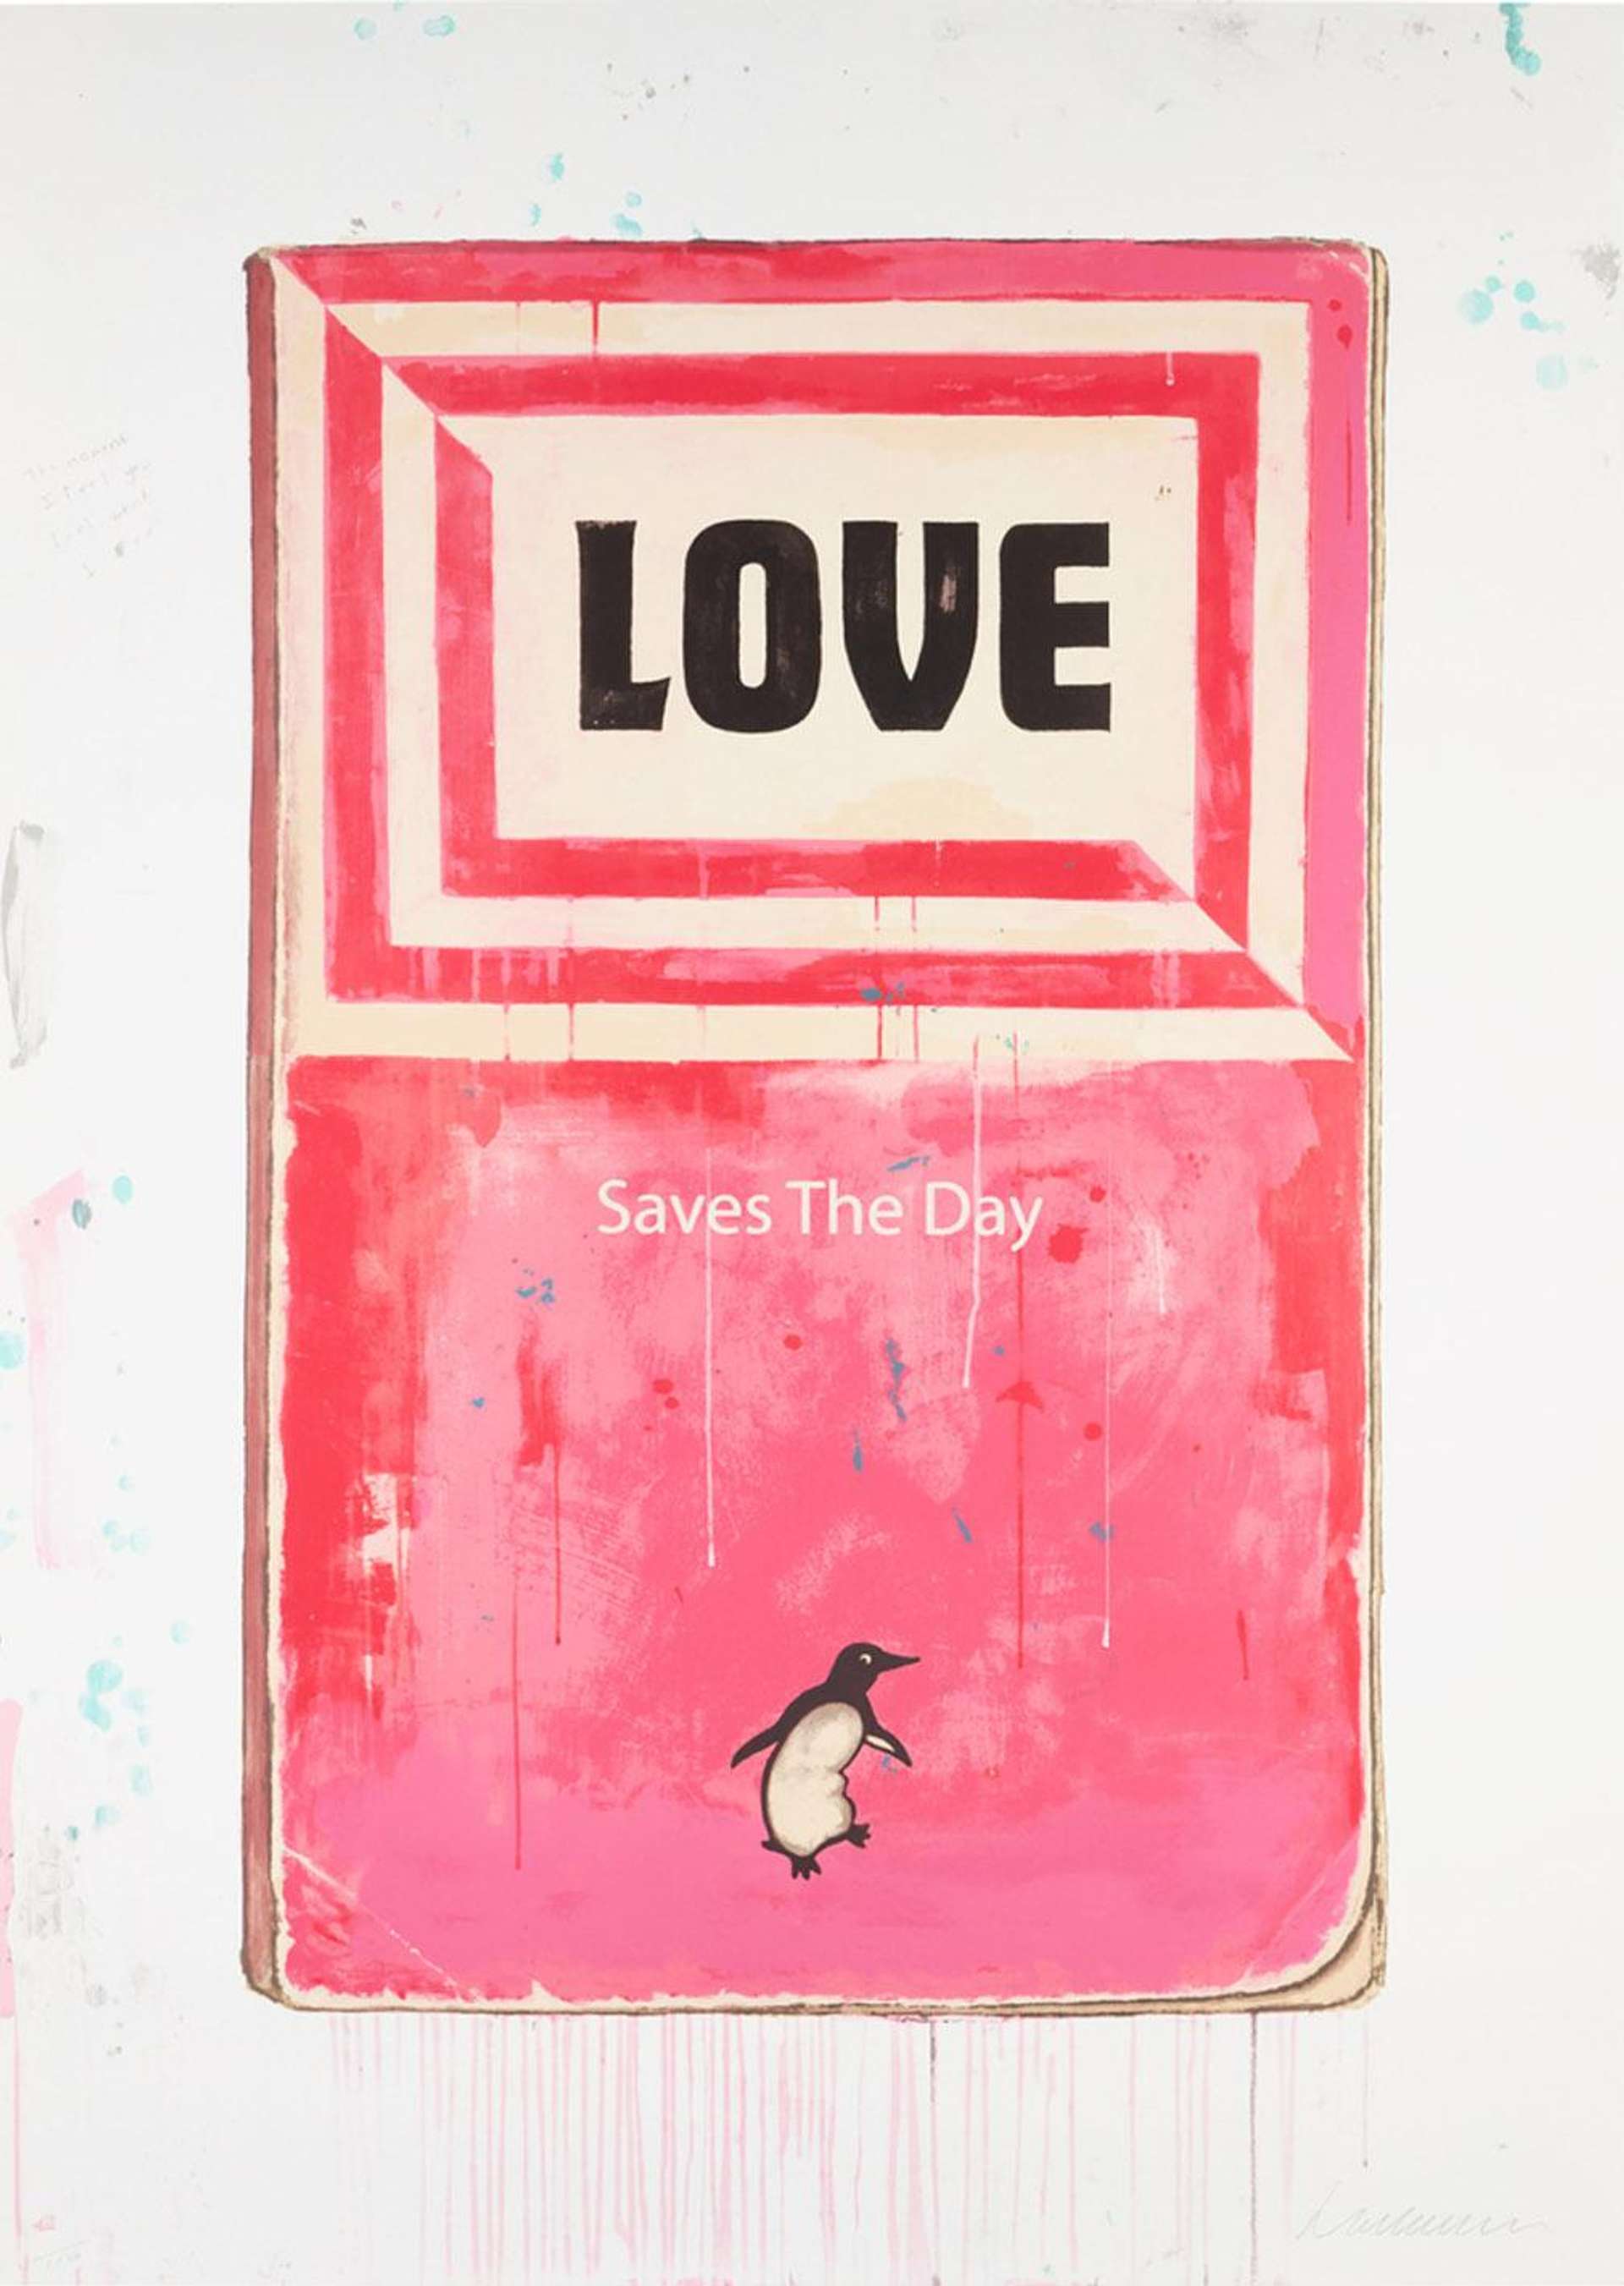 Love Saves The Day - Signed Print by Harland Miller 2014 - MyArtBroker